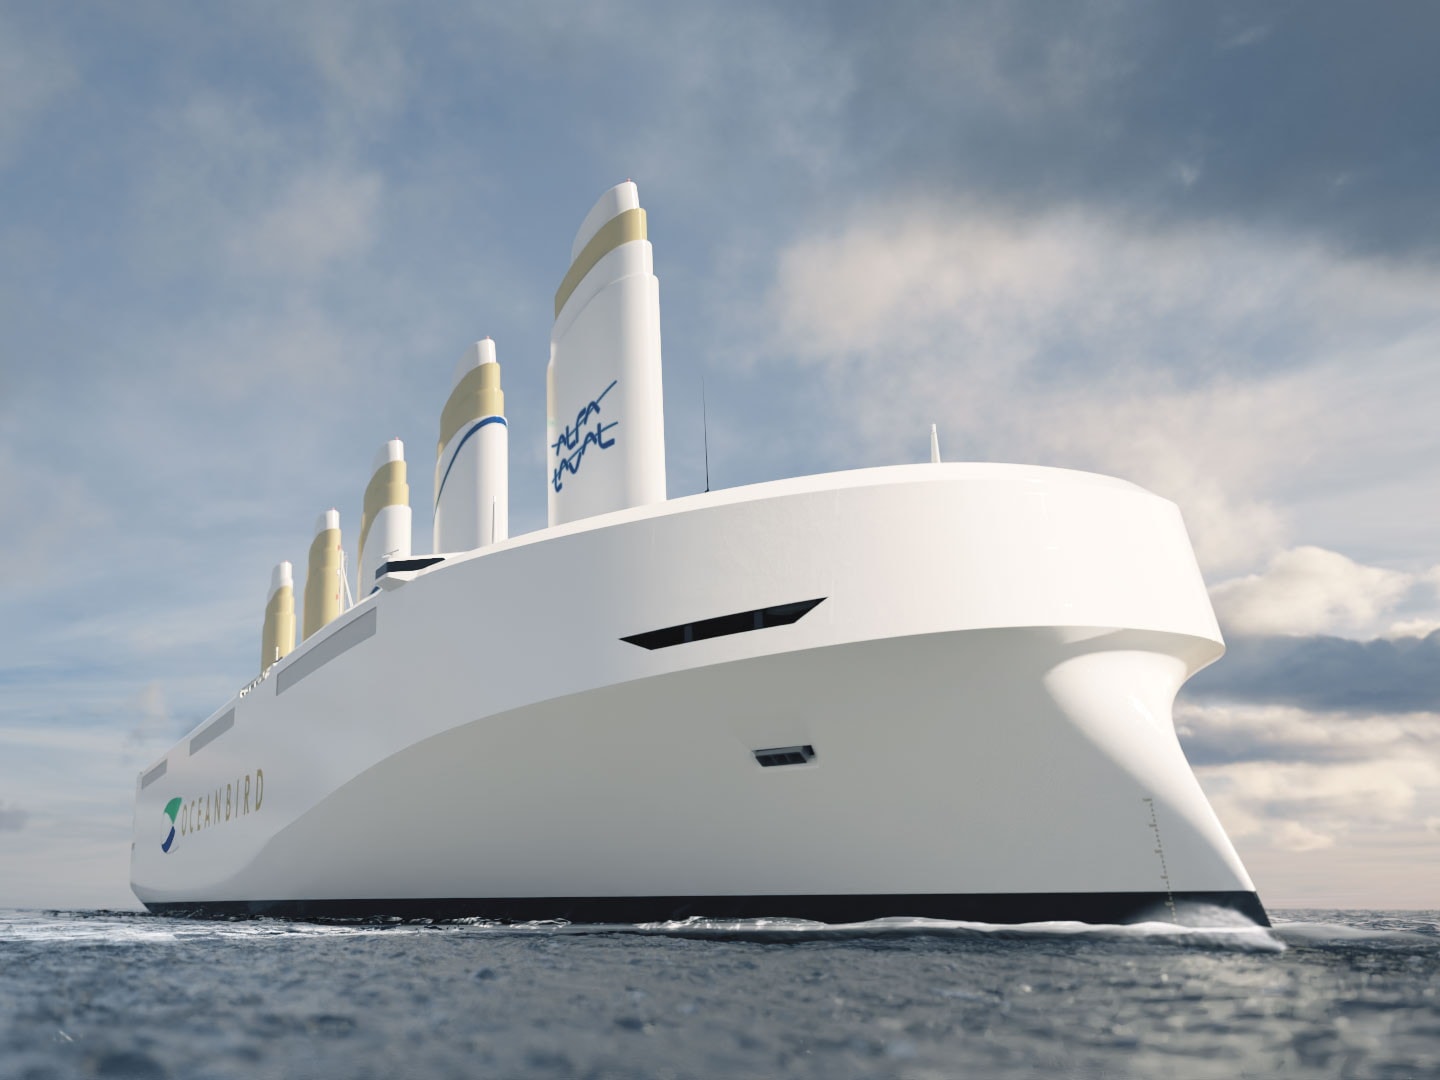 Wind-Powered Oceanbird Is the Tallest Ship in the World, Can Carry 7,000 Cars - autoevolution